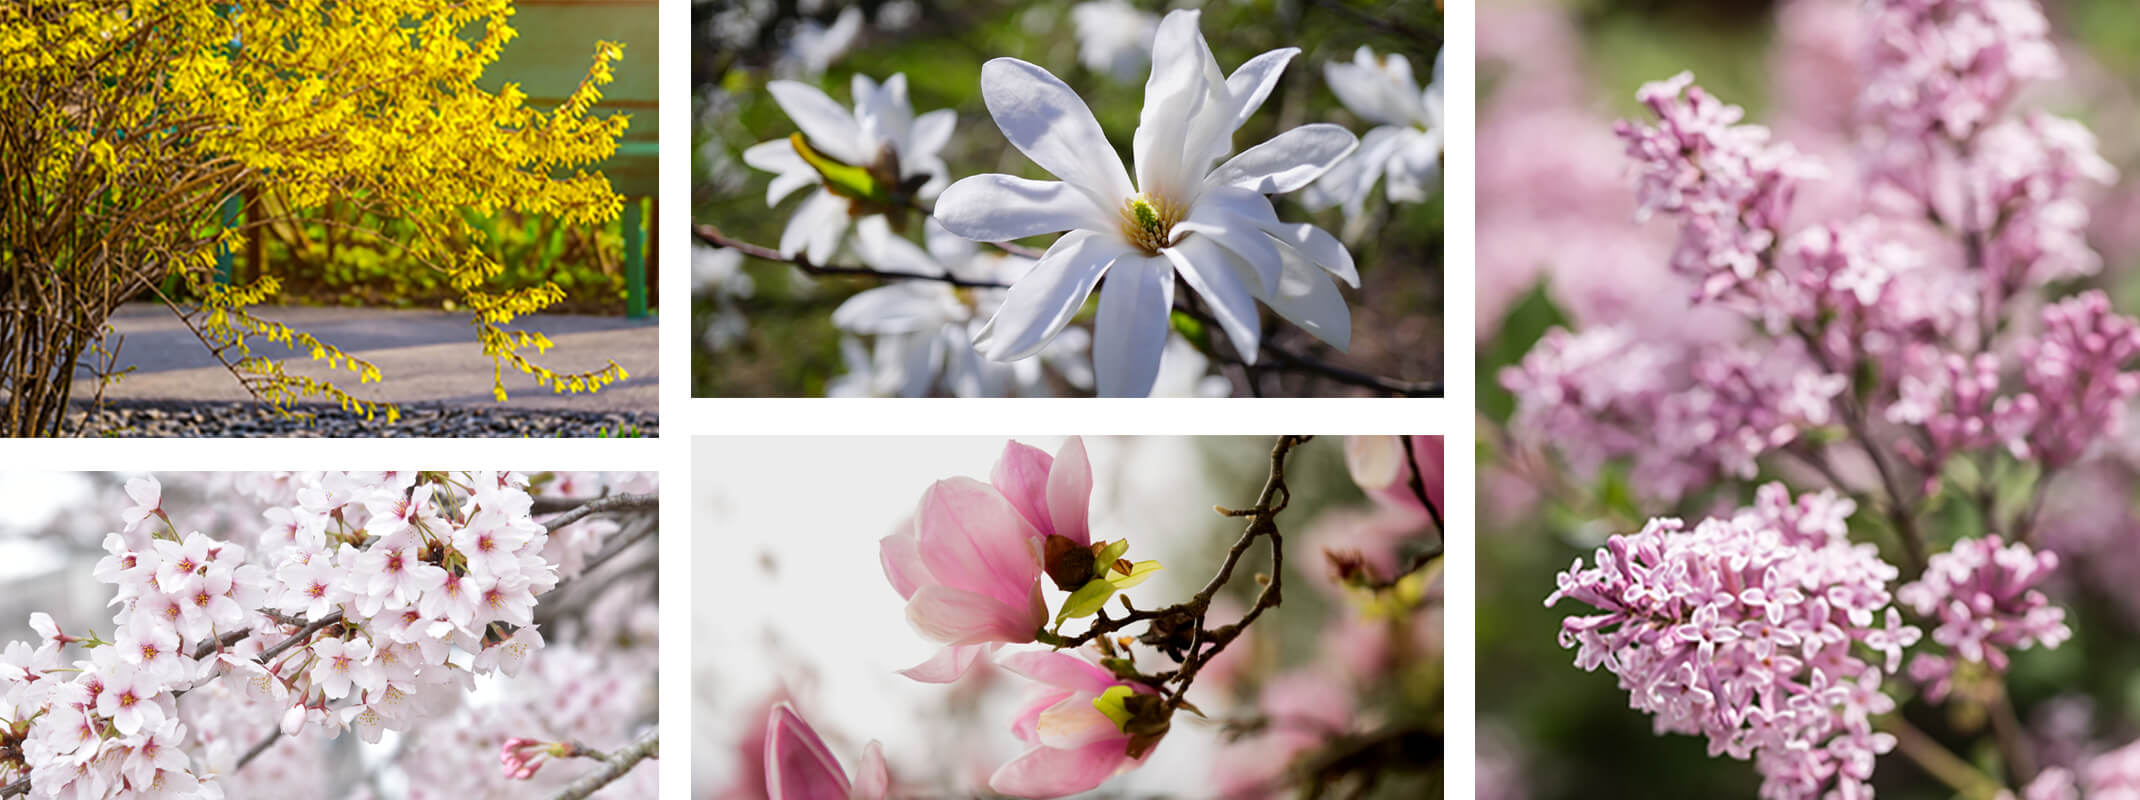 Flowering trees and shrubs banner forsynthia, magnolias, cherry tree, and lilacs